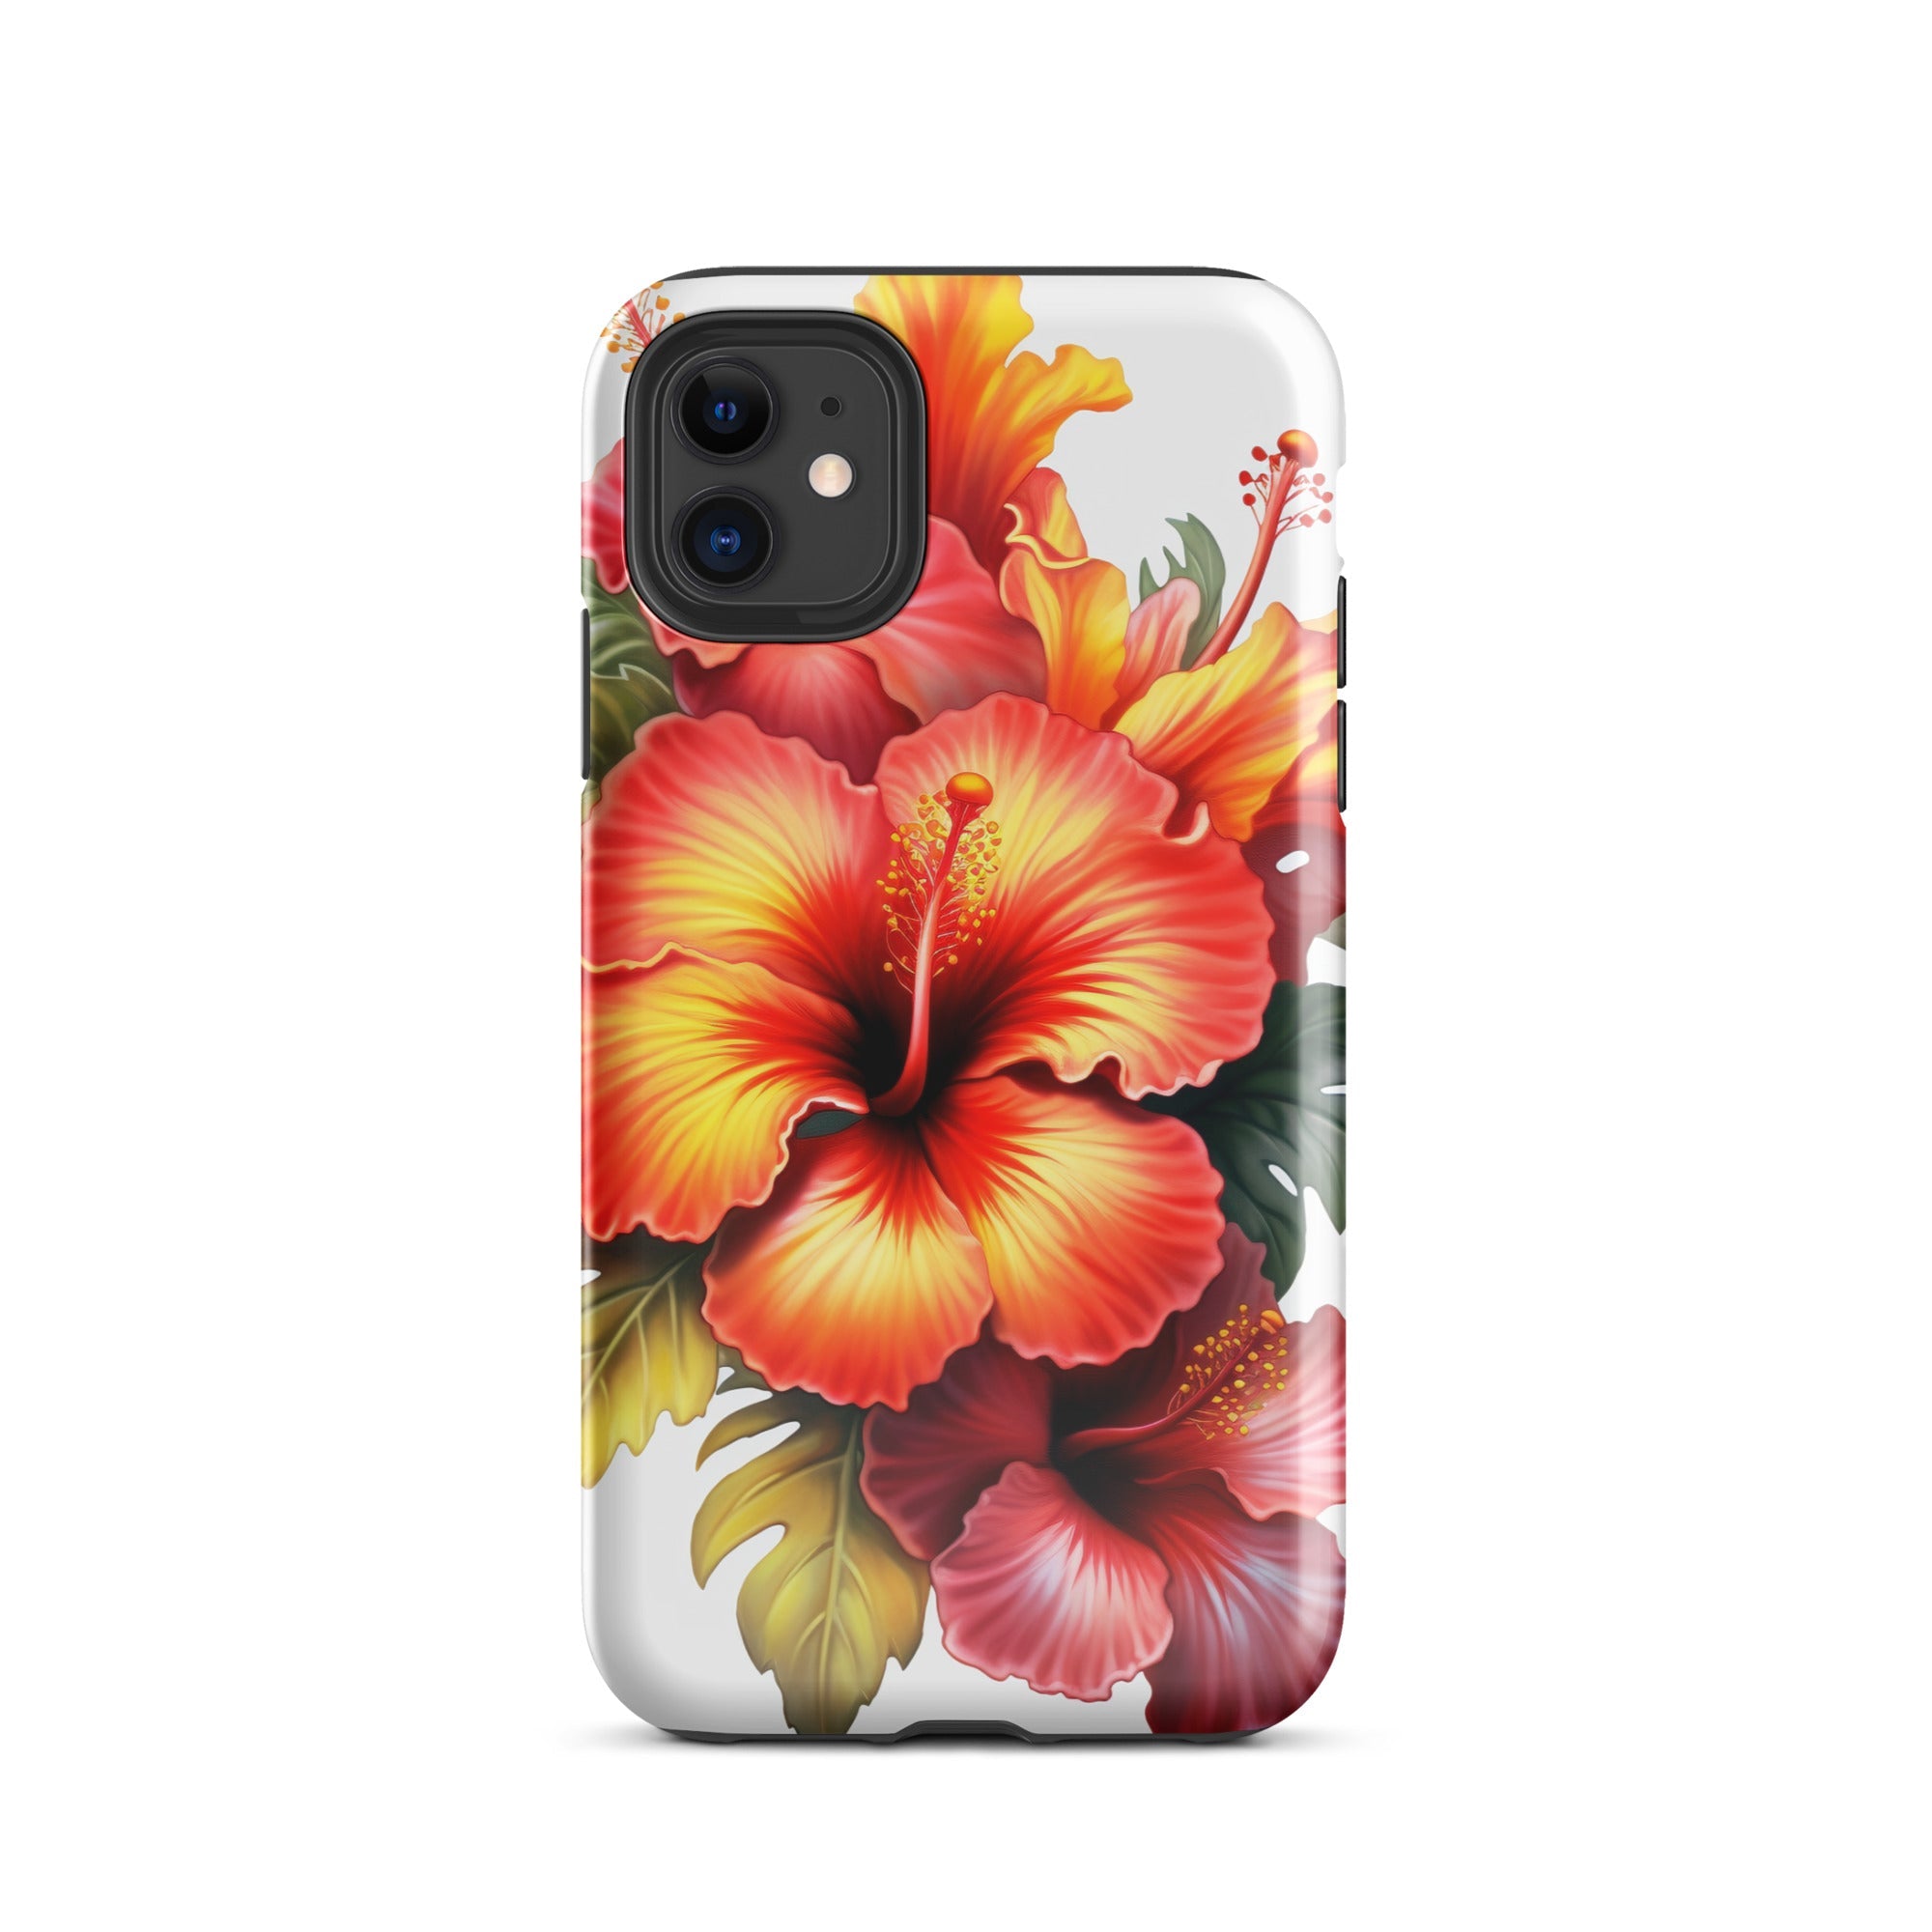 Hibiscus Flower iPhone Case by Visual Verse - Image 1